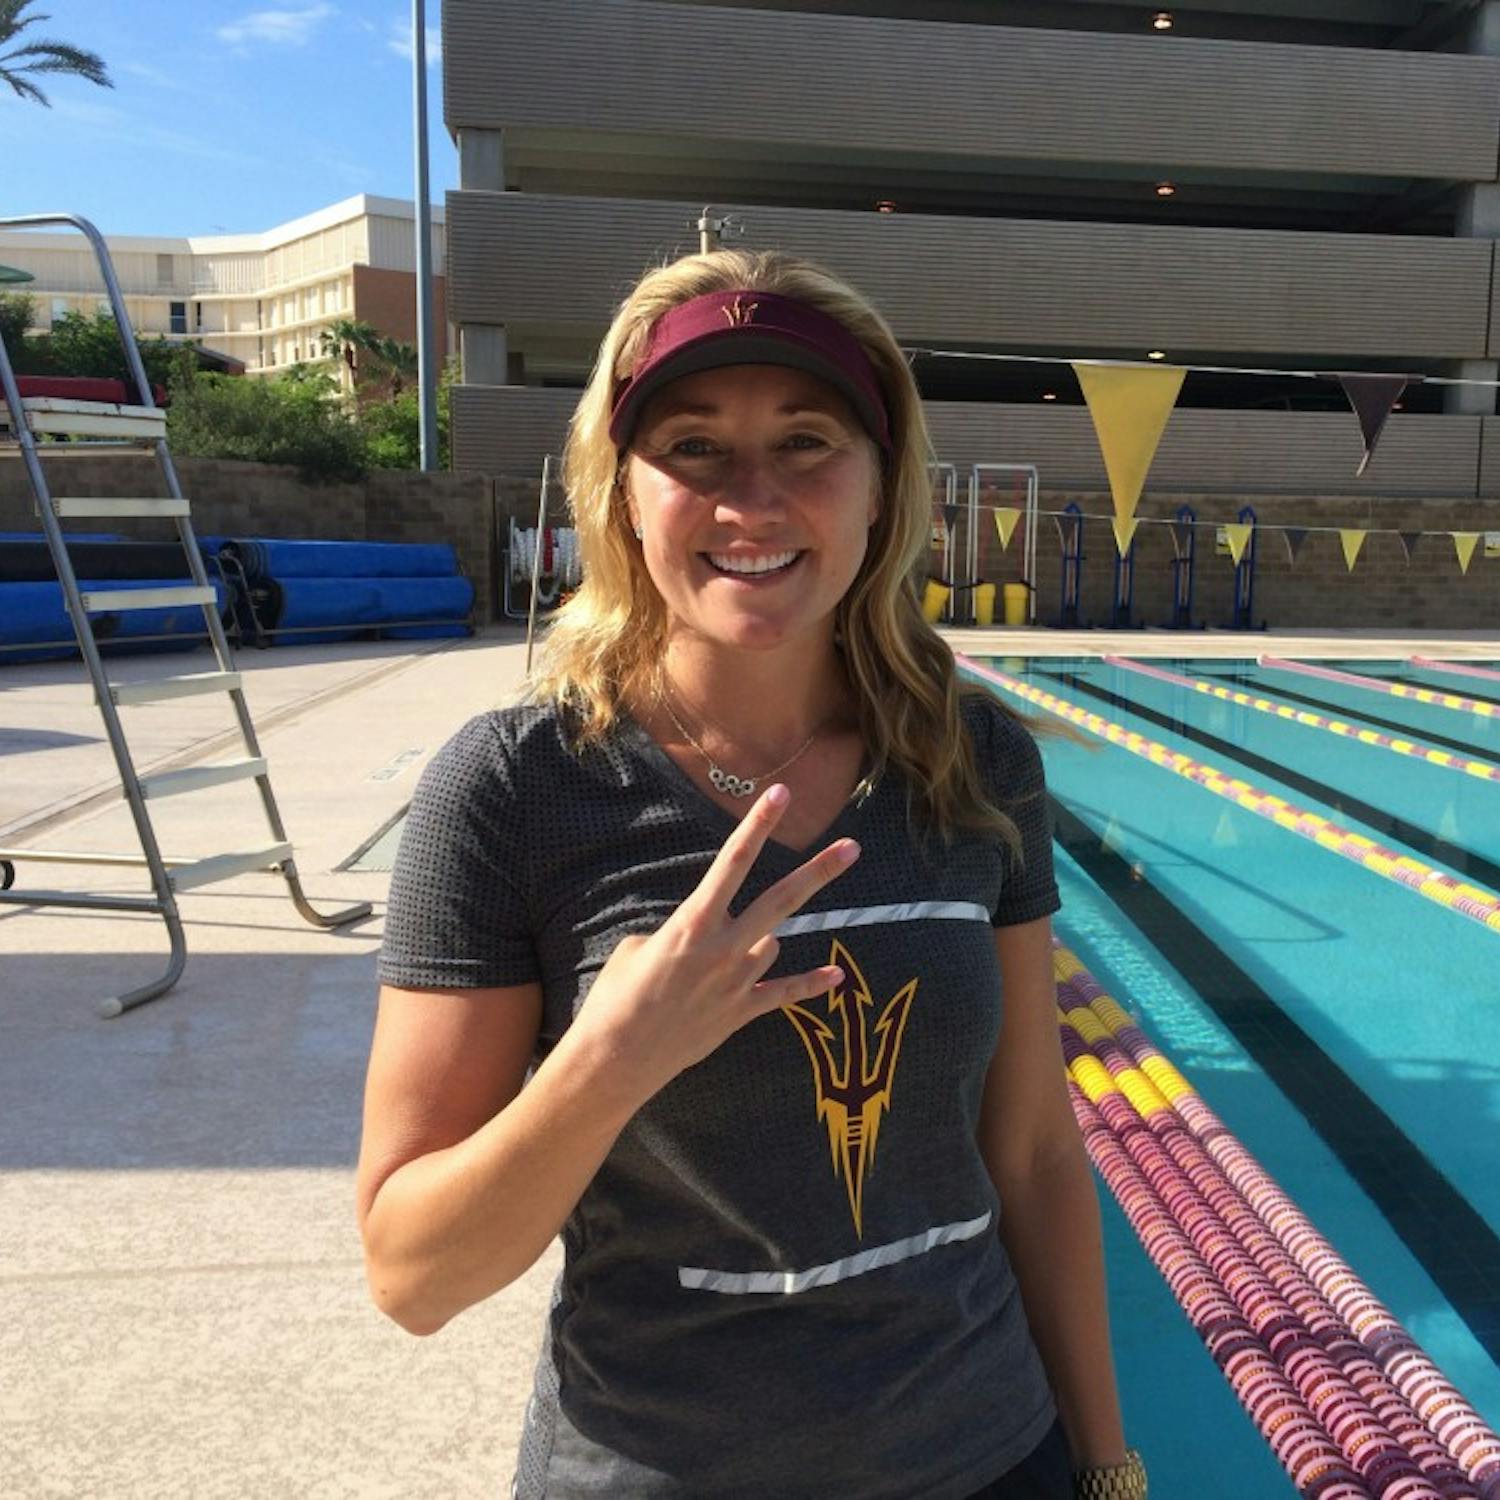 Misty Hyman poses for a photo on the pool deck of the Mona Plummer Aquatic Center in Tempe.